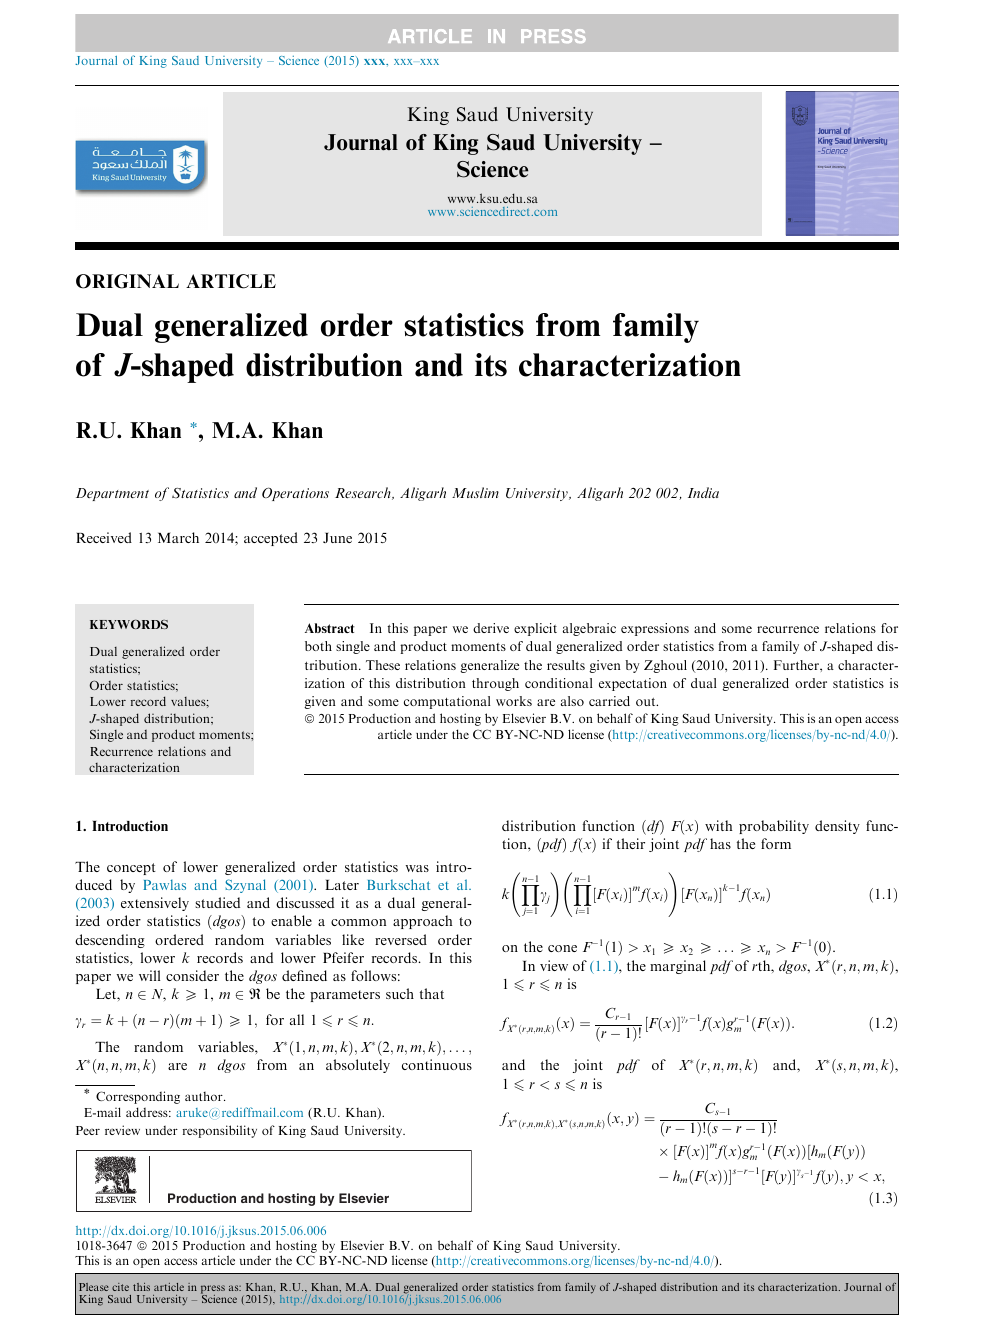 Dual Generalized Order Statistics From Family Of J Shaped Distribution And Its Characterization Topic Of Research Paper In Physical Sciences Download Scholarly Article Pdf And Read For Free On Cyberleninka Open Science